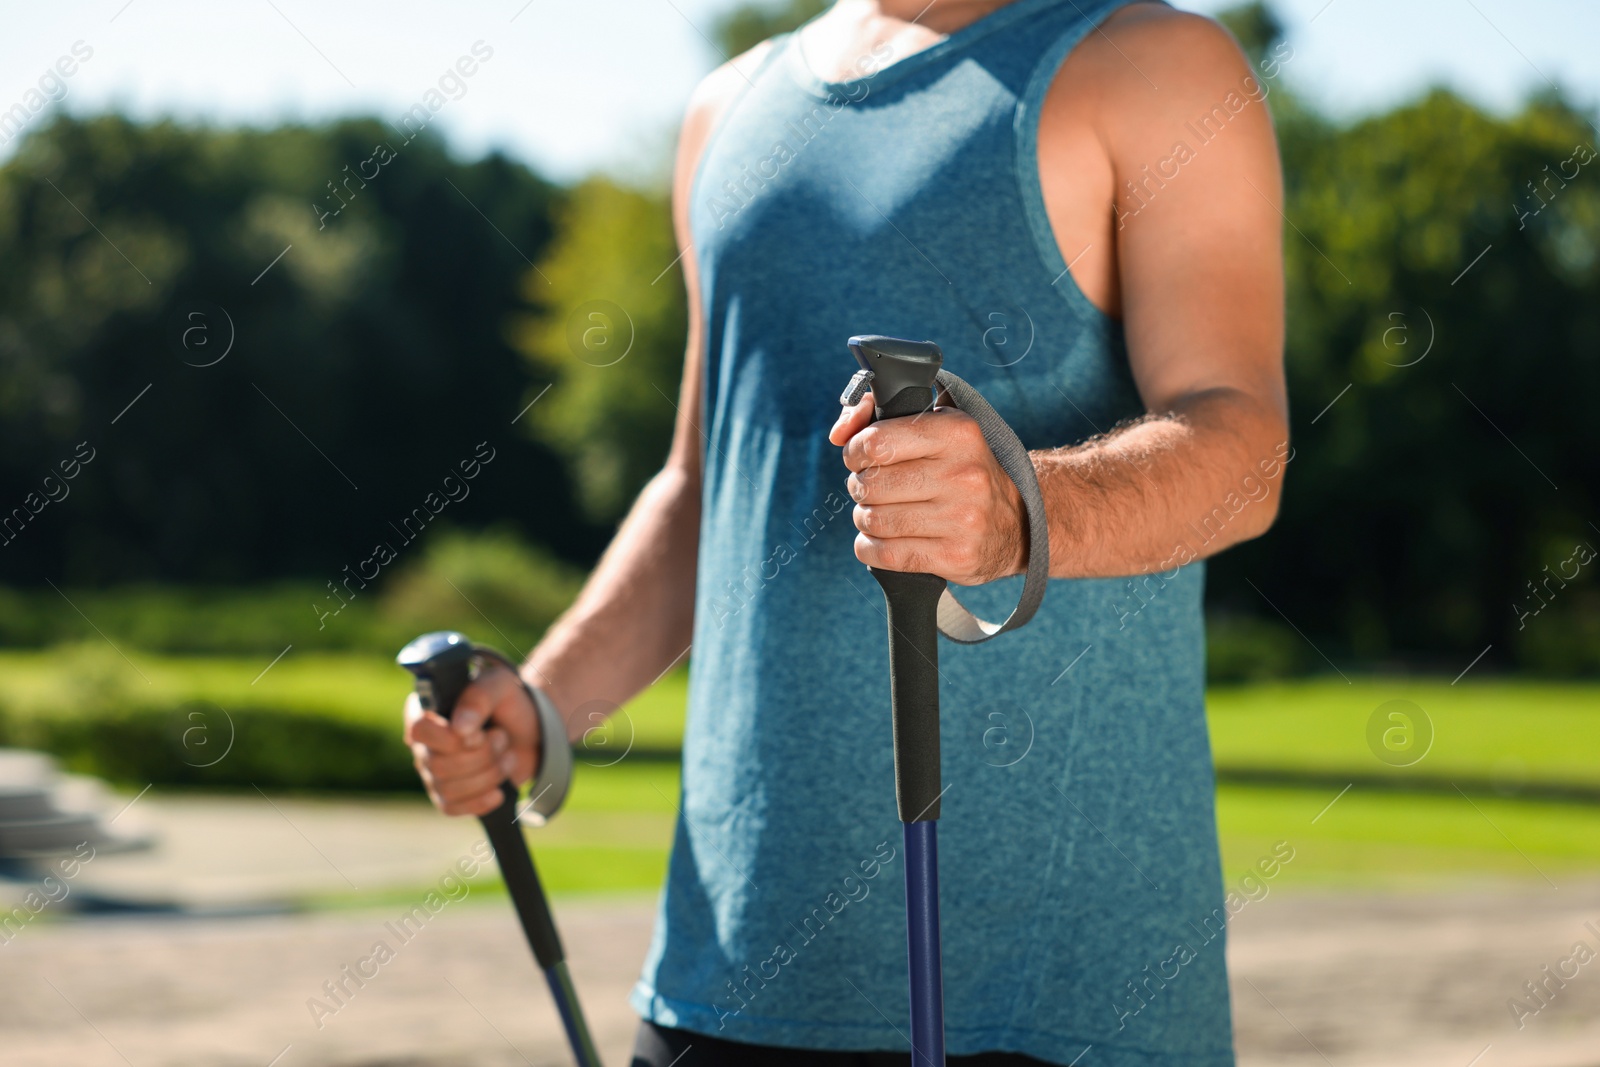 Photo of Man practicing Nordic walking with poles in park on sunny day, closeup